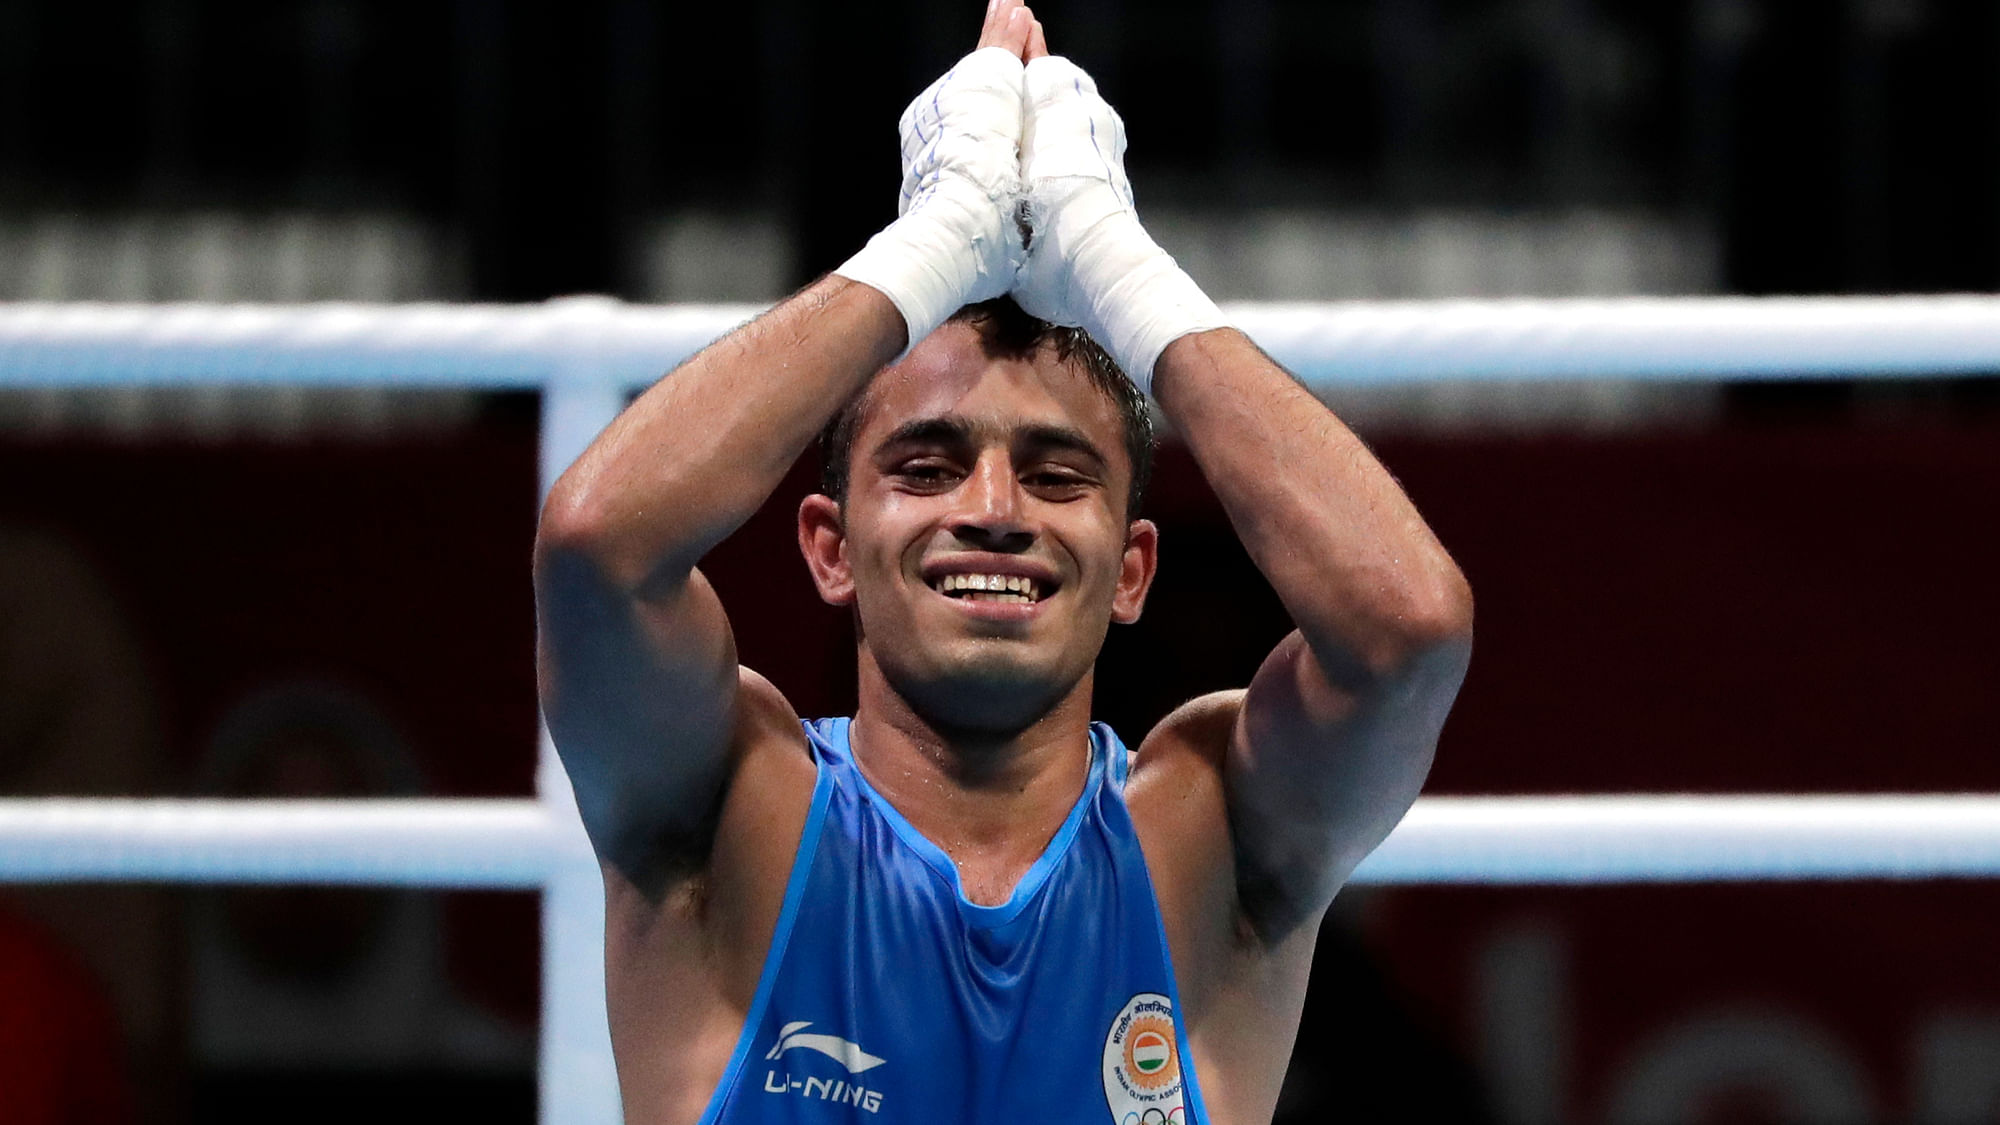 Men’s World Boxing Championship 2019: Asian Games gold medallist Amit Panghal (52 kg) seeks his first medal from the World Championships.